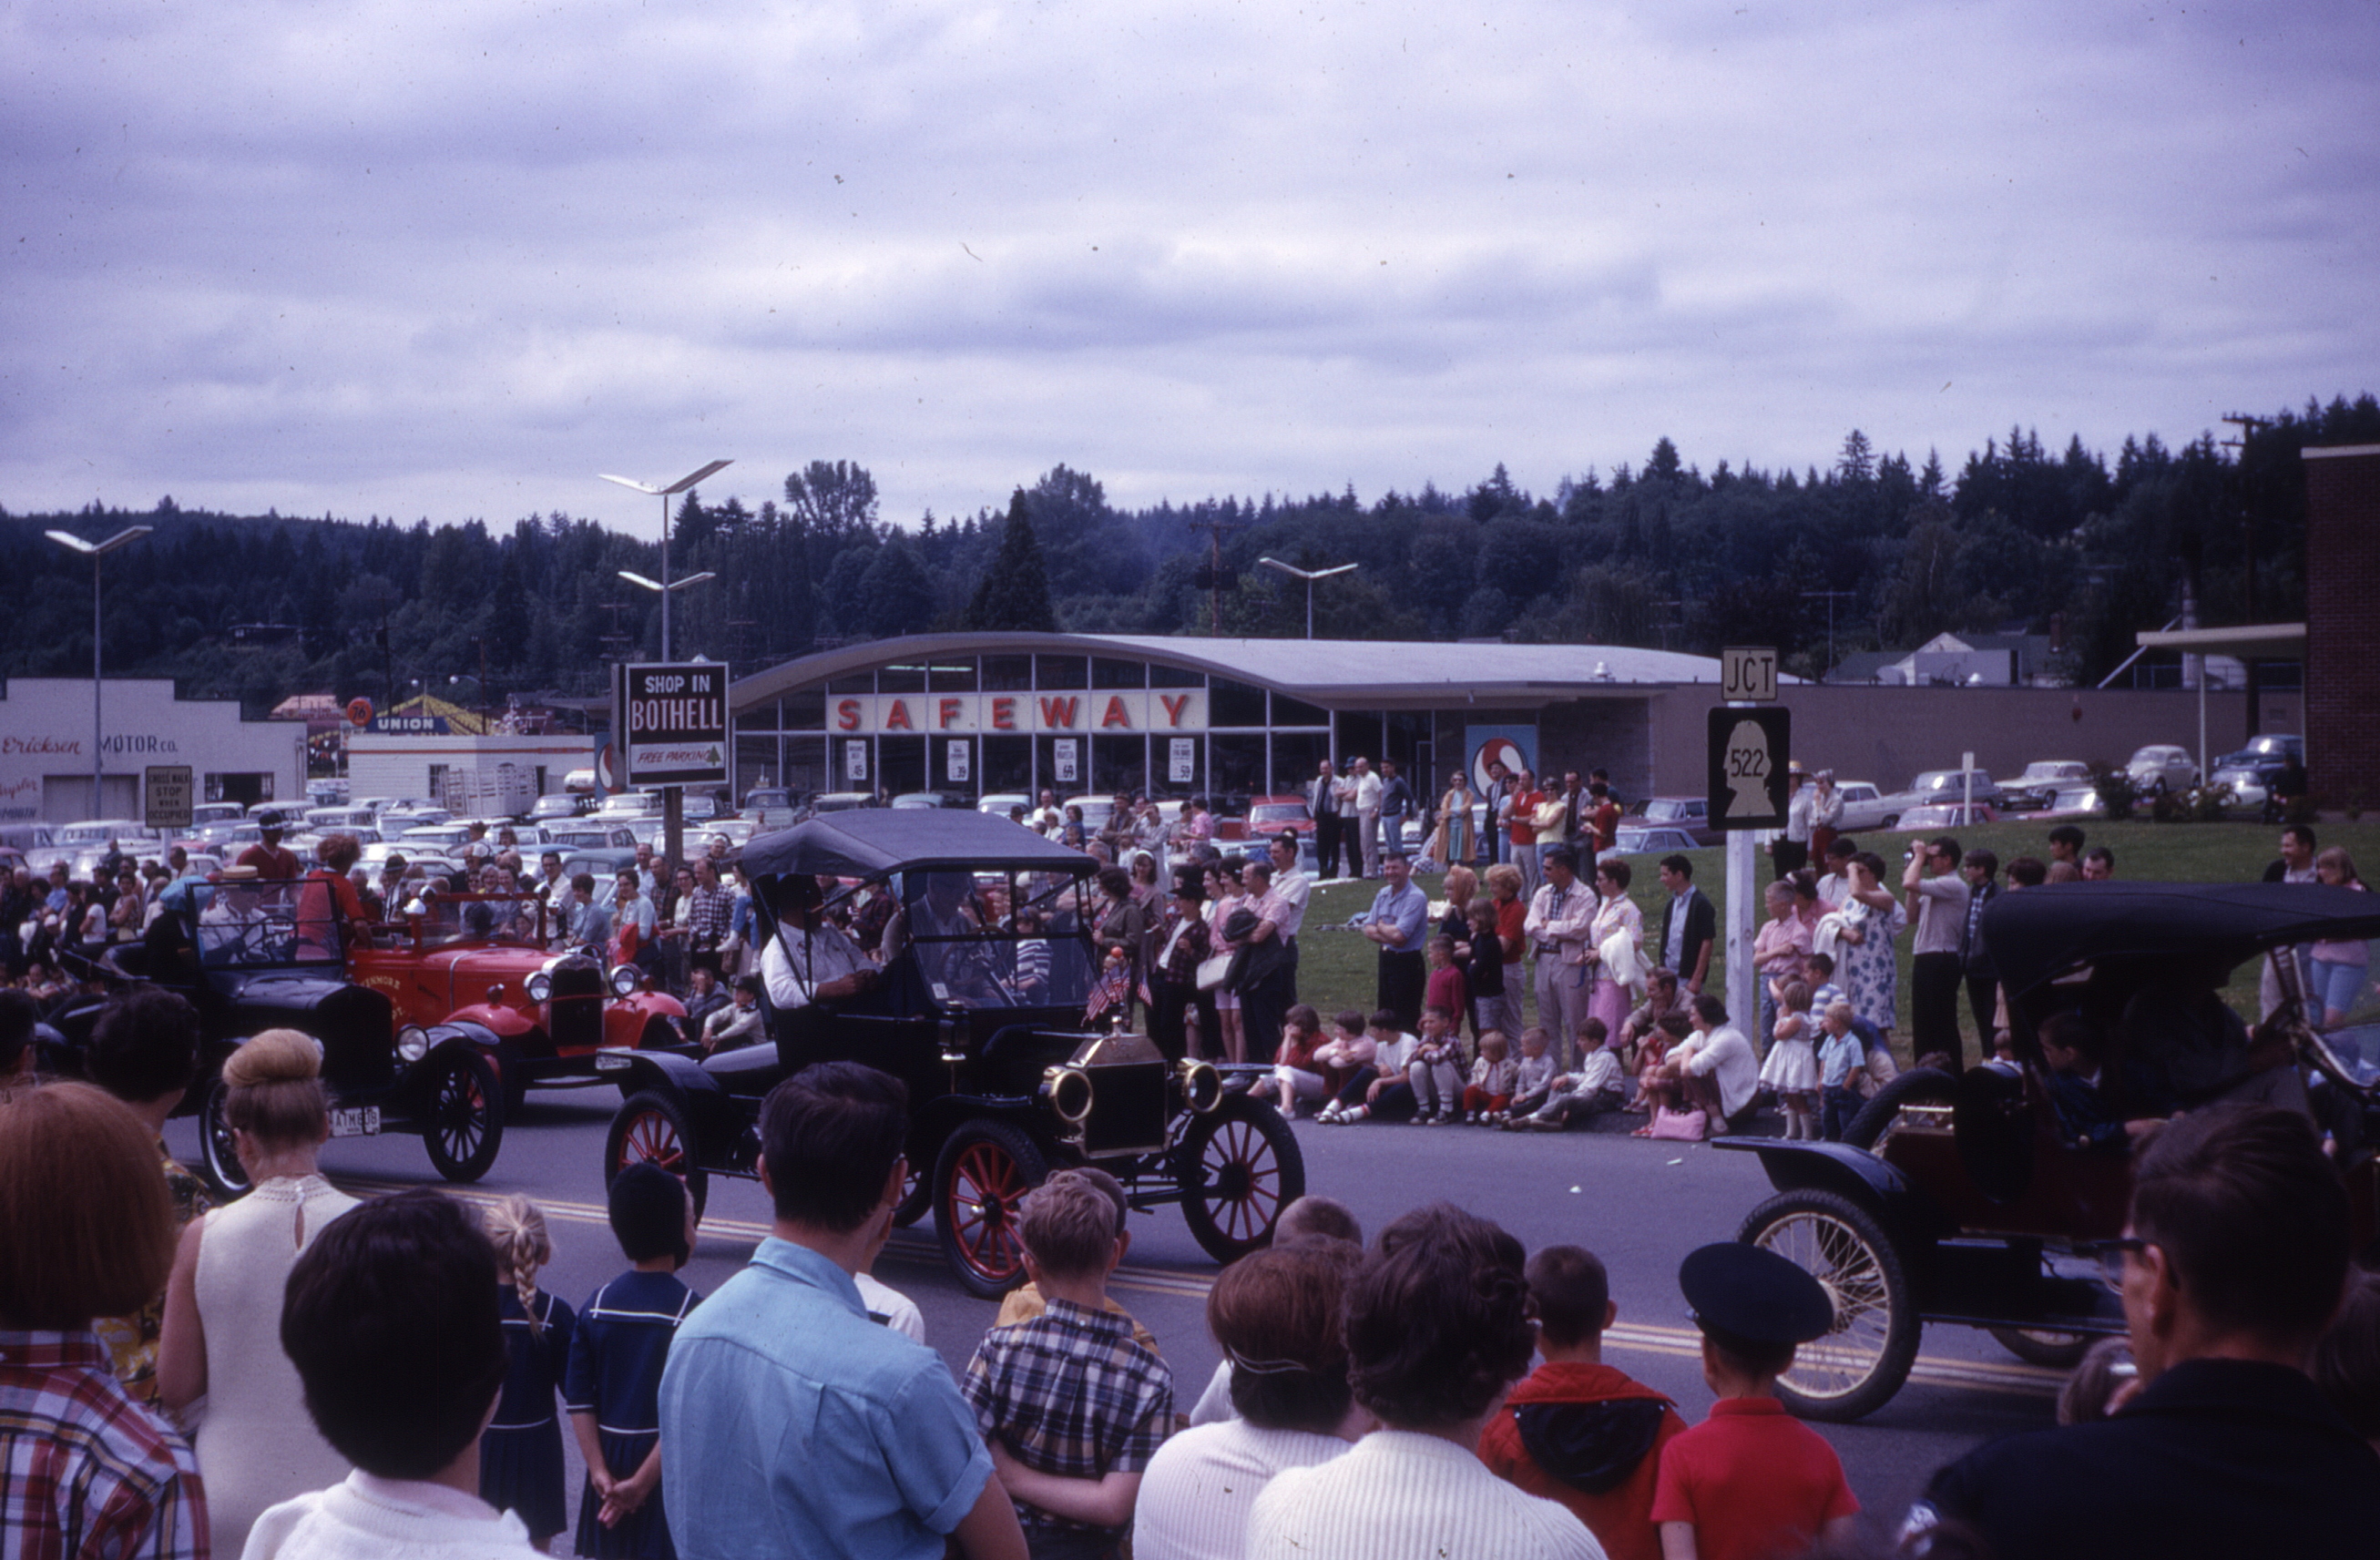 The parade route turned north from Main Street on the Bothell-Everett Highway, past the new Safeway (built in 1962 on the site of the Avon Theater). Many classic cars driven by members of the Horseless Carriage Club participated in the parade. In the background to the left can be seen Ericksen Motor Company, a Chrysler-Plymouth dealership owned by third-generation Bothell merchant Bud Ericksen, and the Union 76 service station owned by Lowell Haynes.